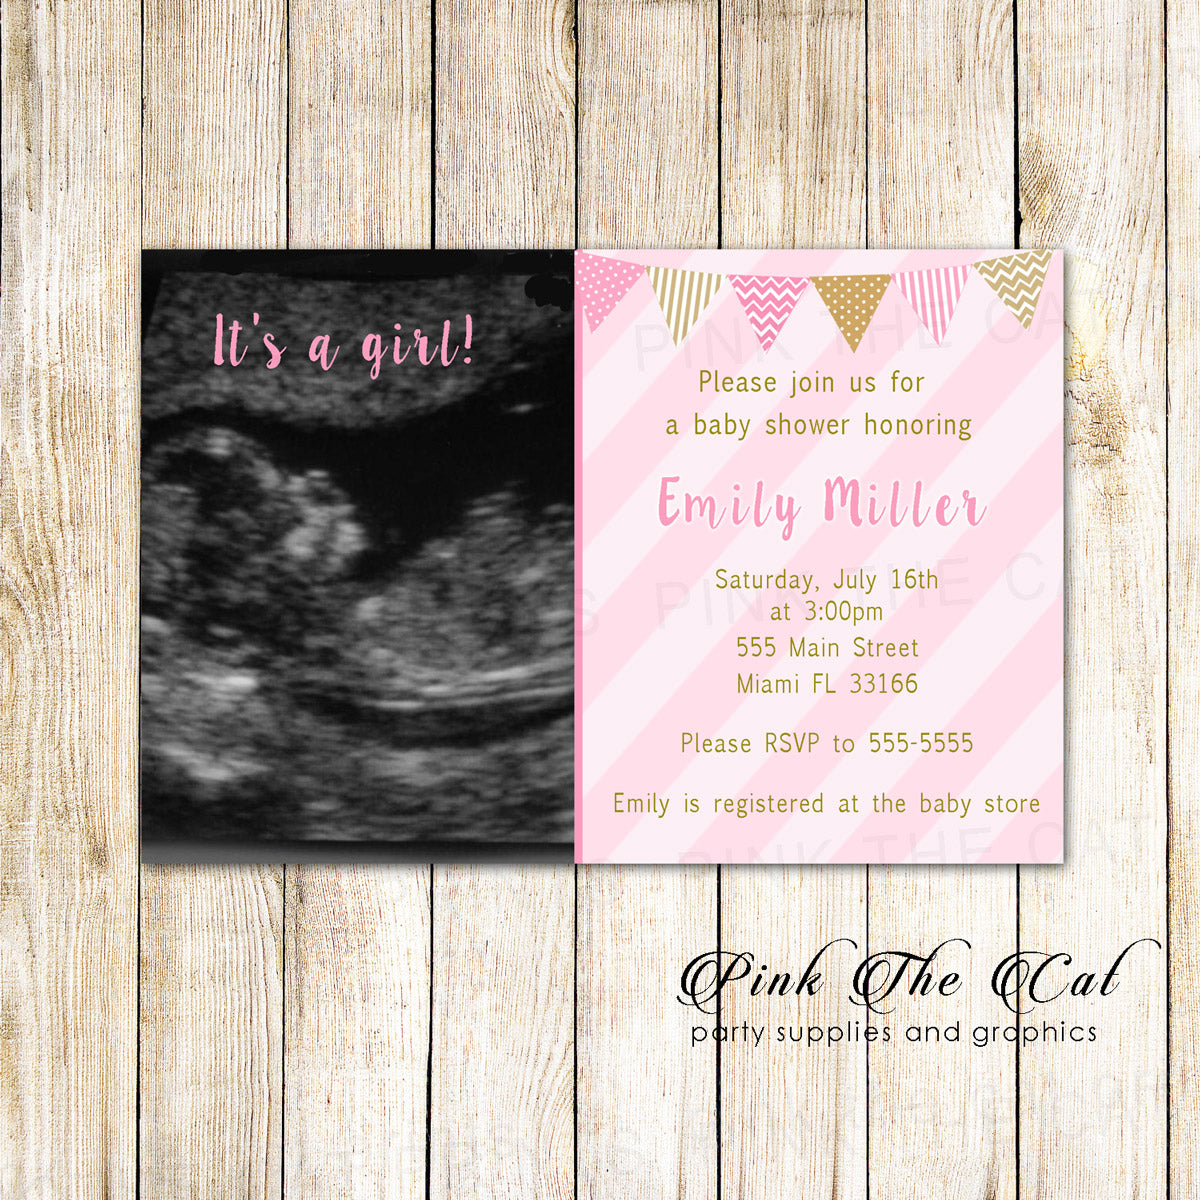 Baby Shower Invitations Pink Gold Girl With Photo Printable Pink The Cat